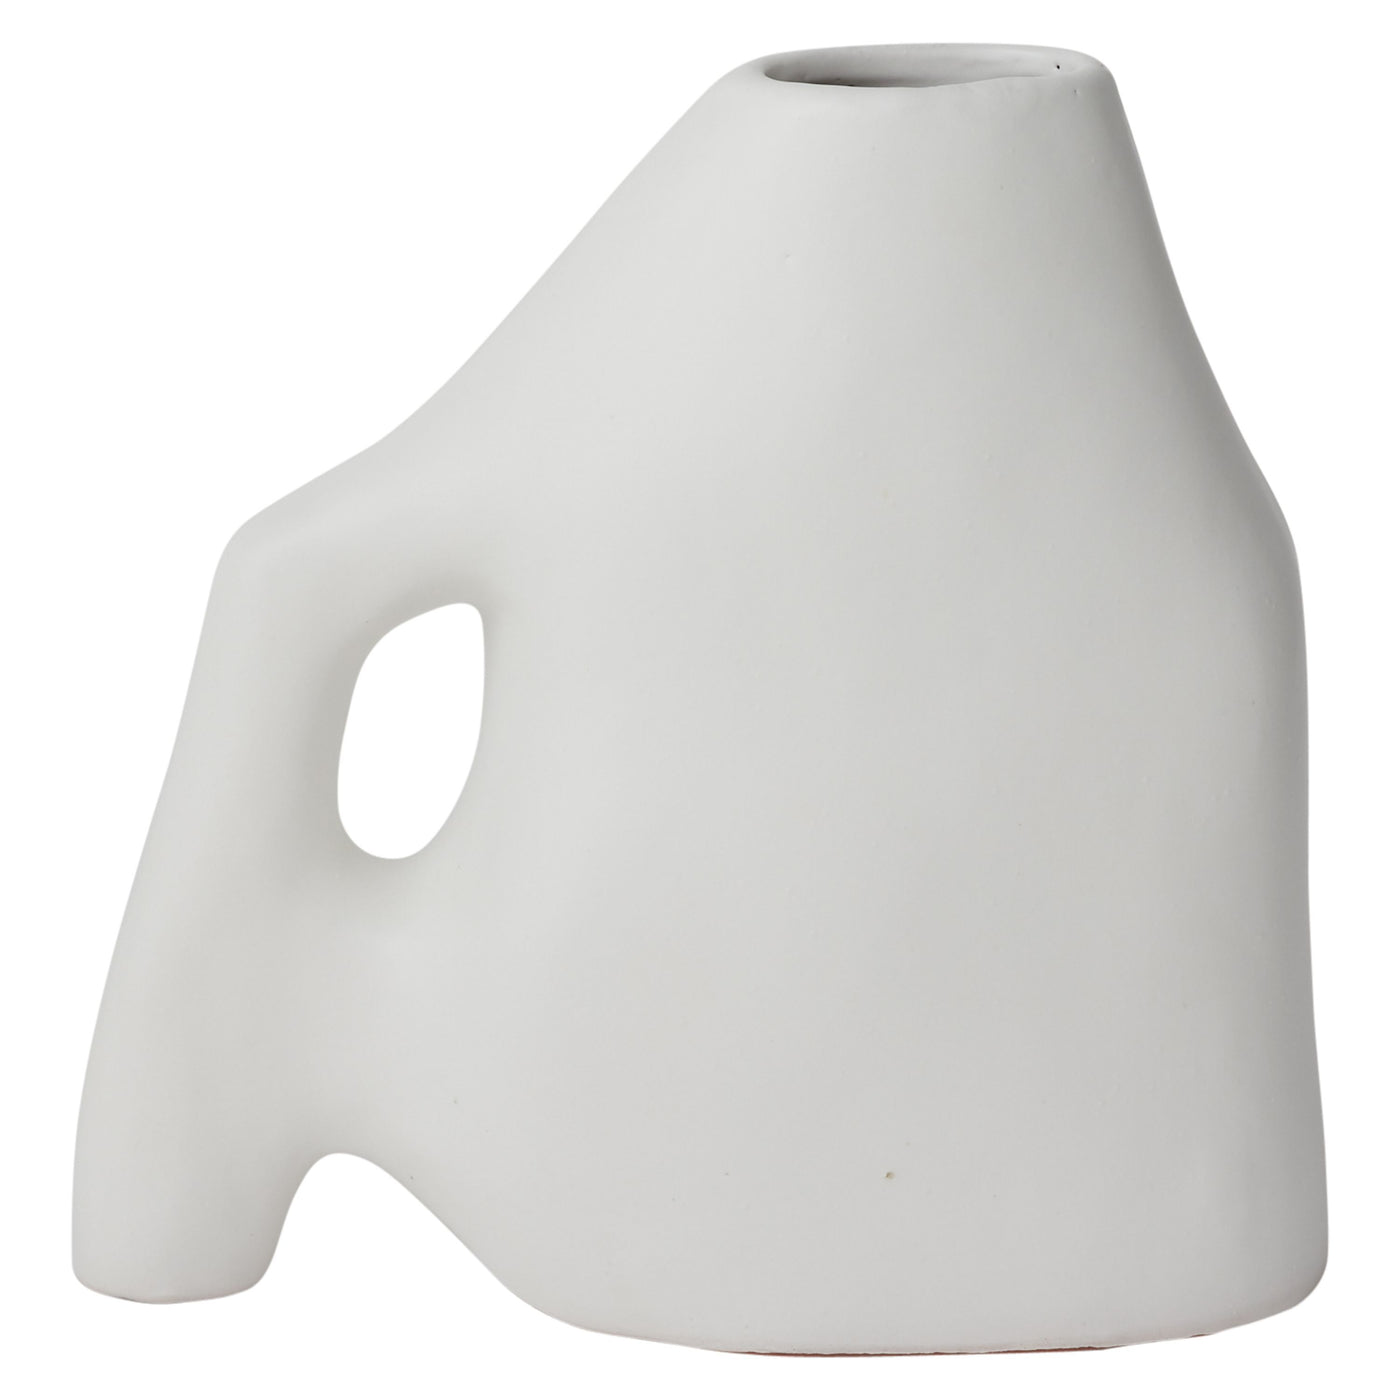 VASE WHITE WITH HOLE (Available in 2 Sizes)